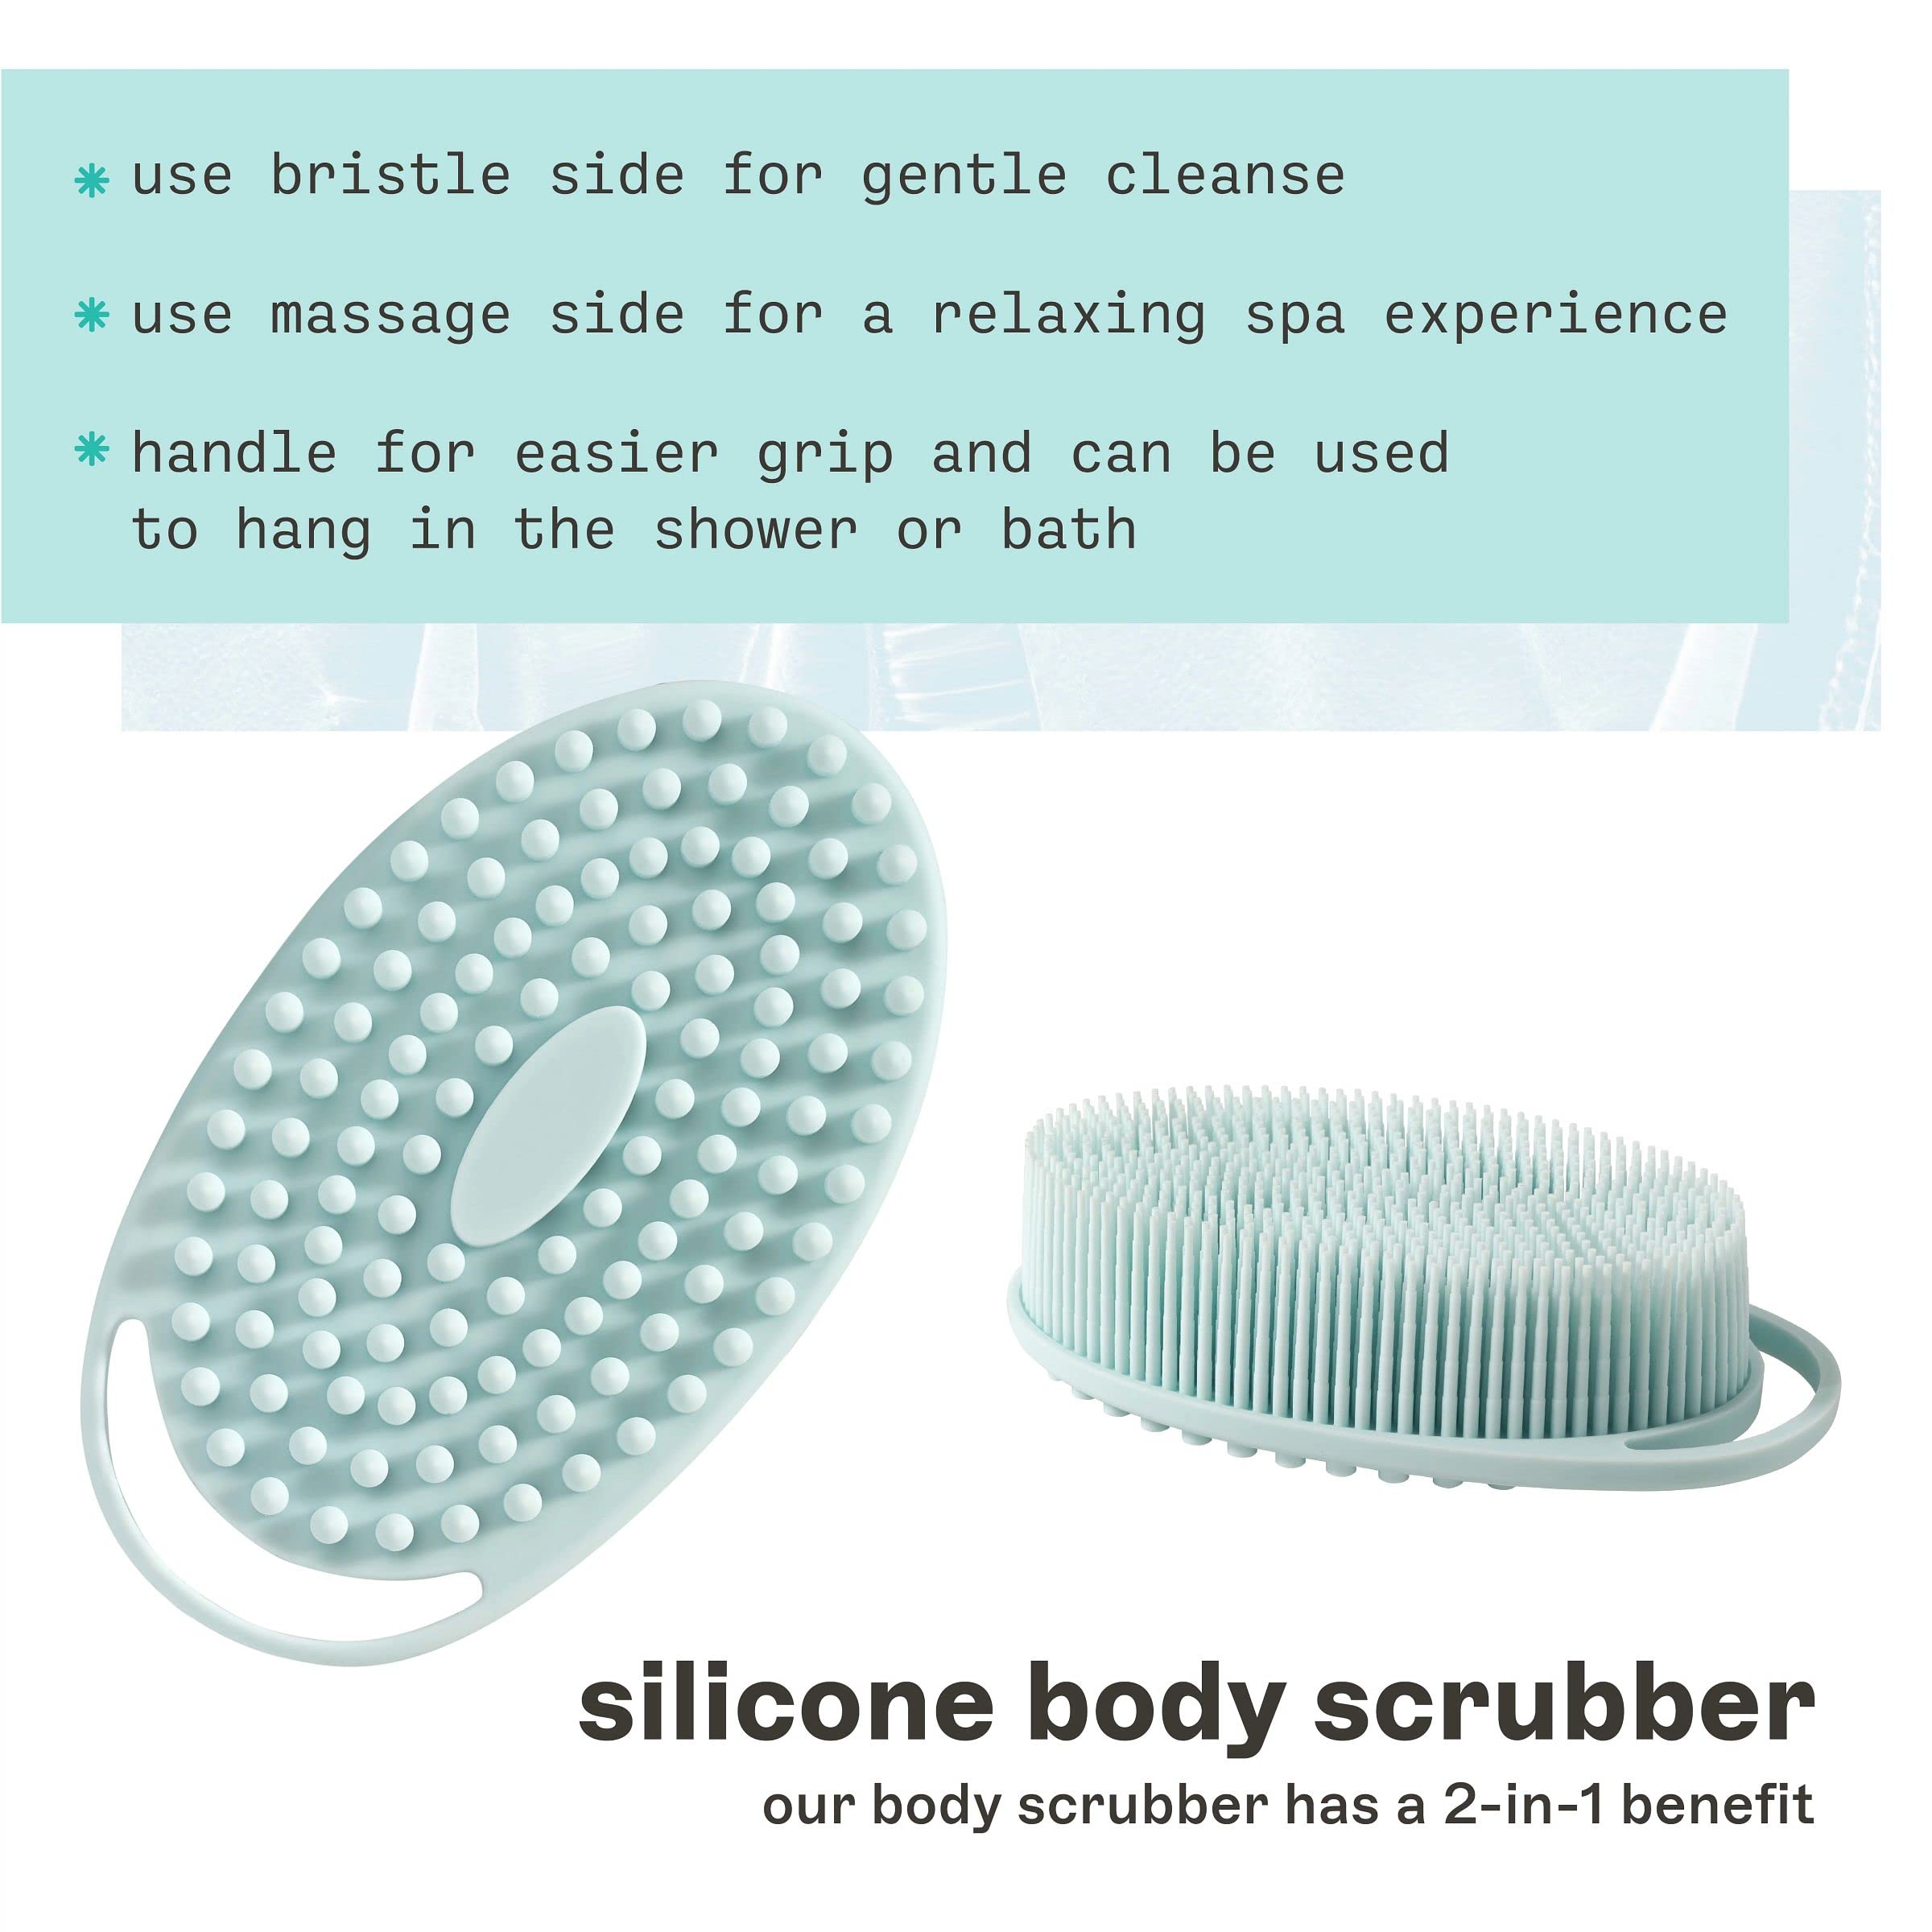 Freeman Premium Exfoliating Silicone Body Scrubber, Easy to Use, Long Lasting, Deep Cleansing On Skin, Better Than Loofahs, Perfect for Men & Women, Hygienic, Cruelty Free & Vegan, 1 Count